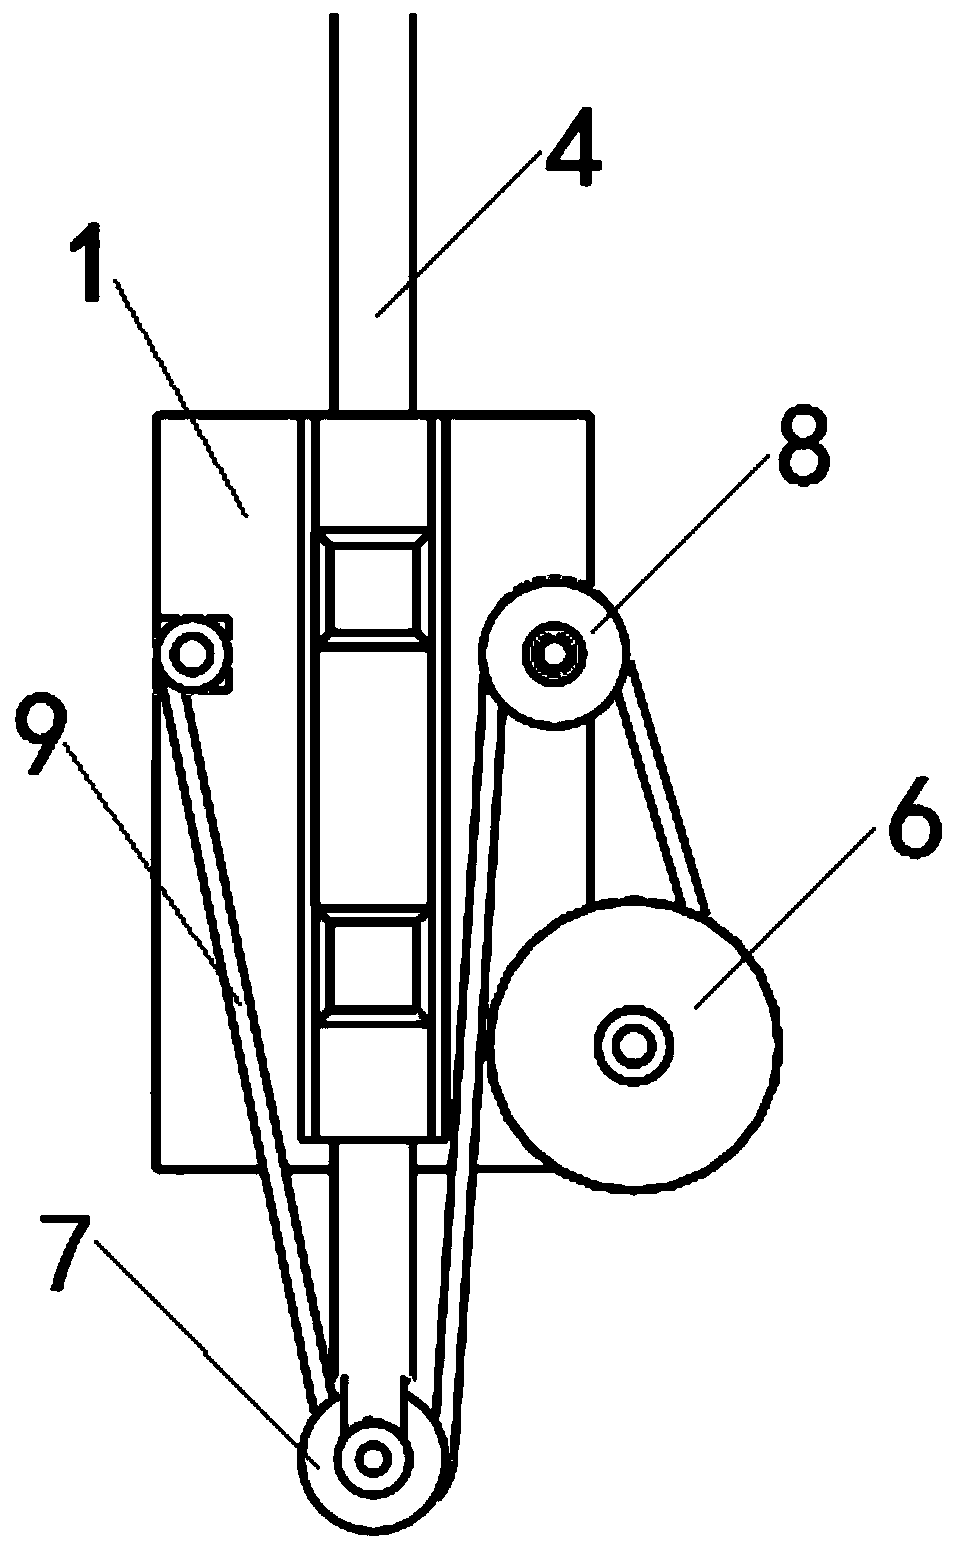 Bridge wind barrier device with adjustable height and porosity